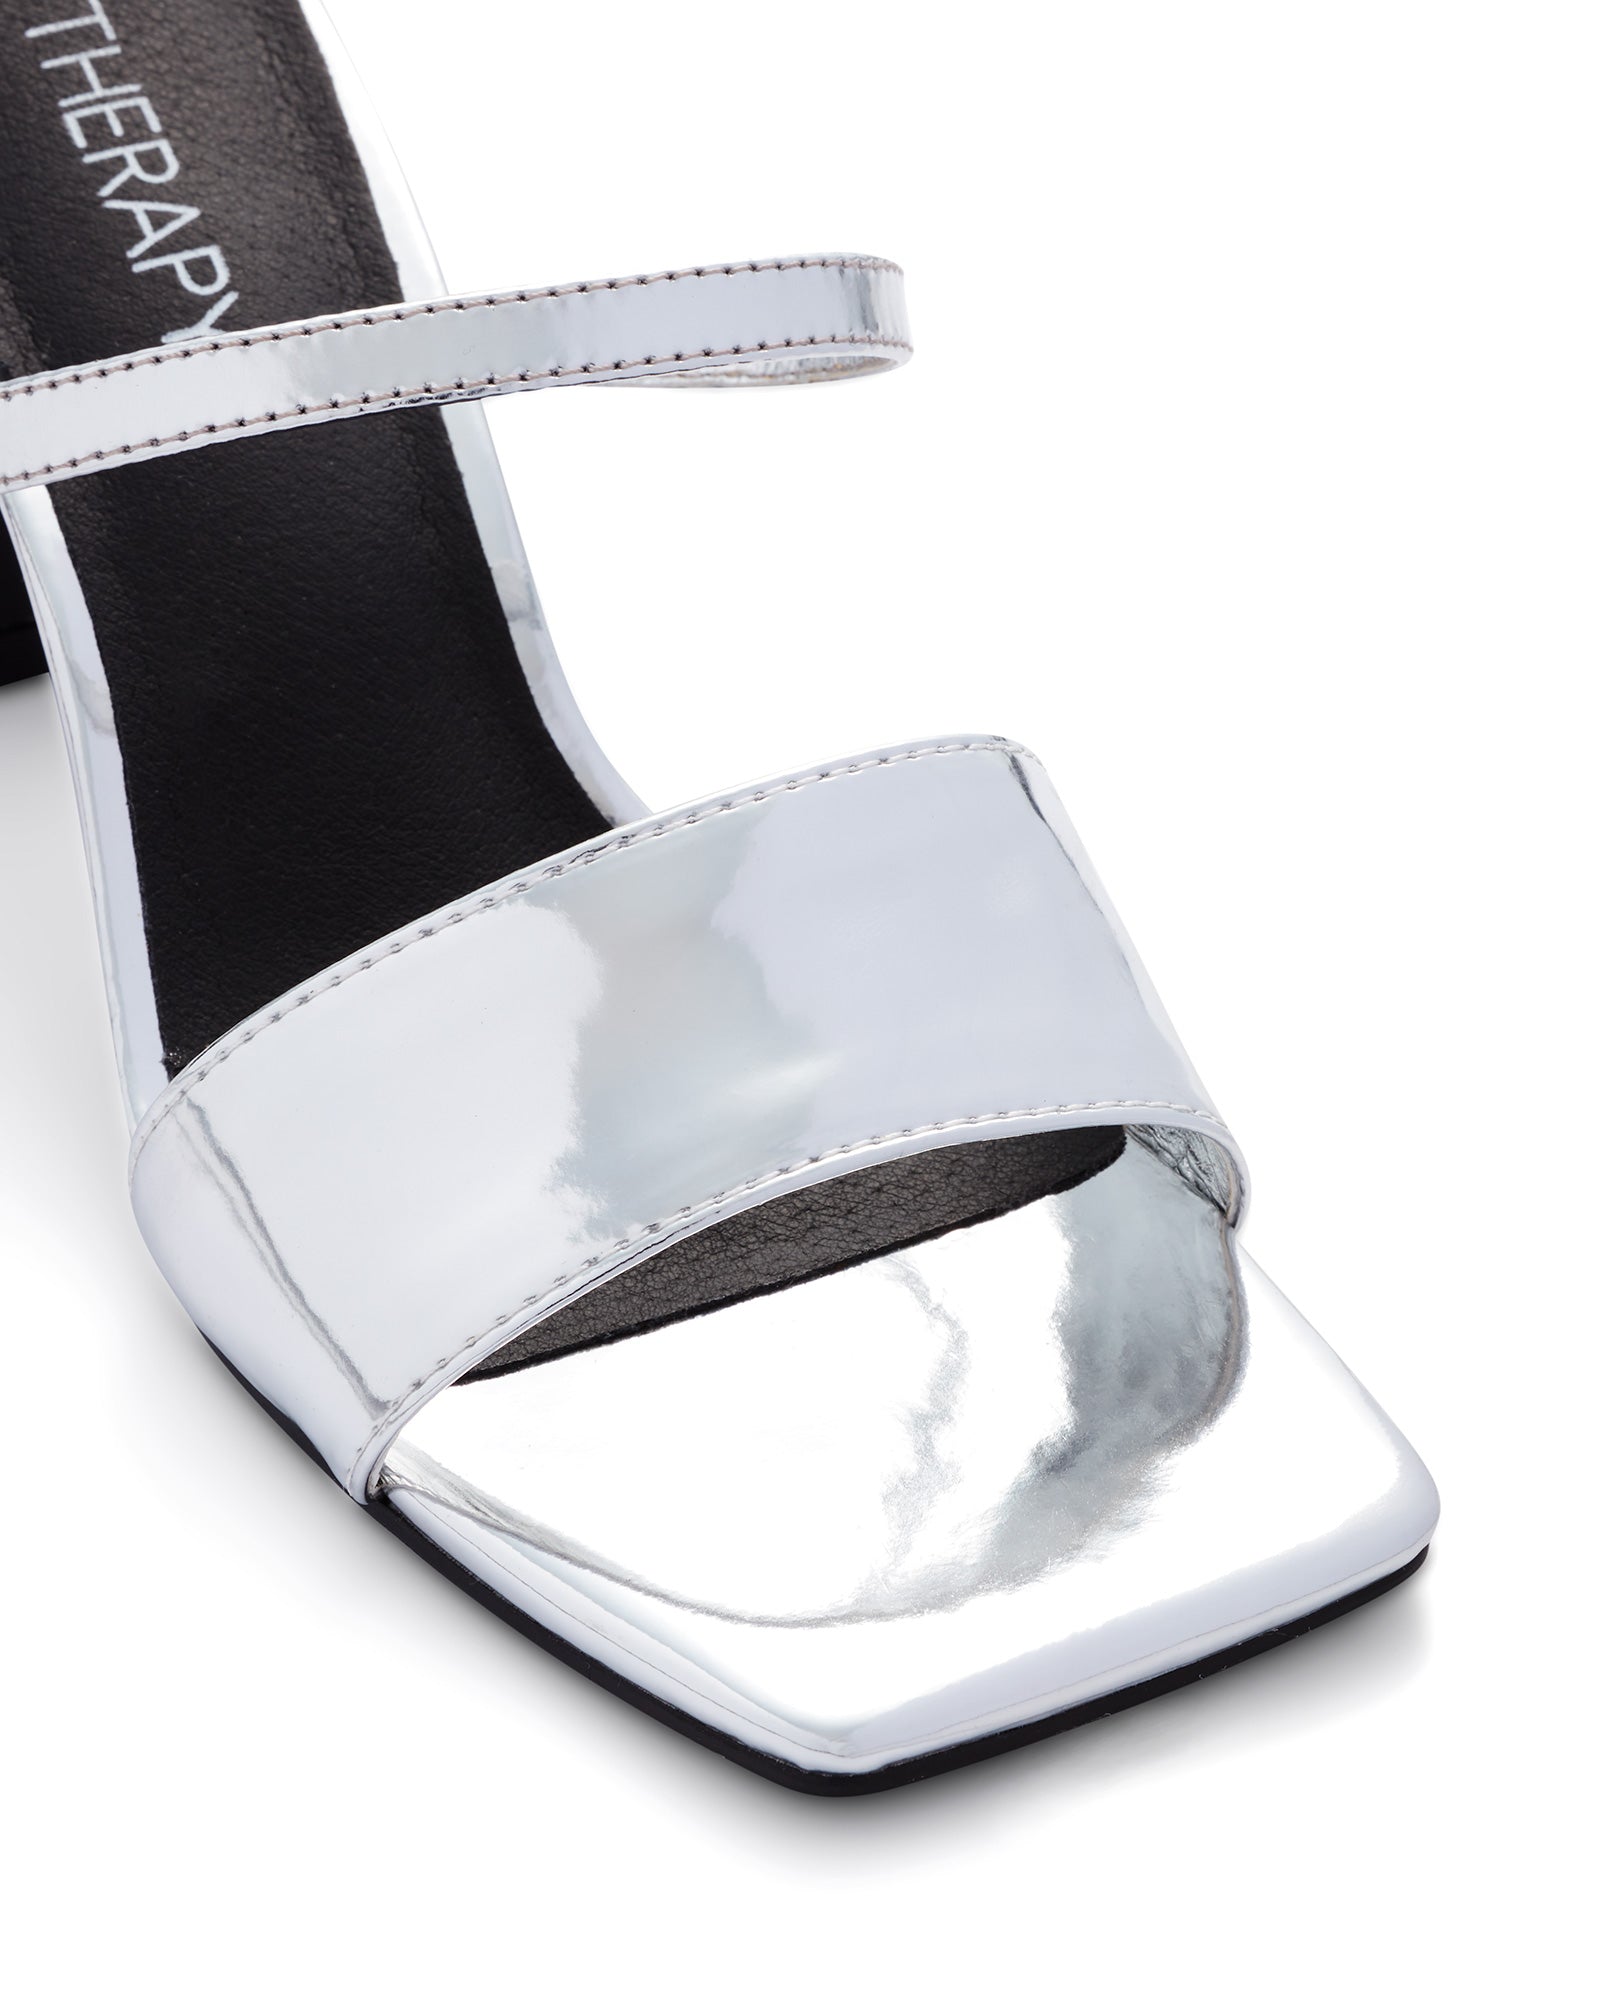 Therapy Shoes Cassie Platinum Metallic | Women's Heels | Sandals | Mules | Strappy